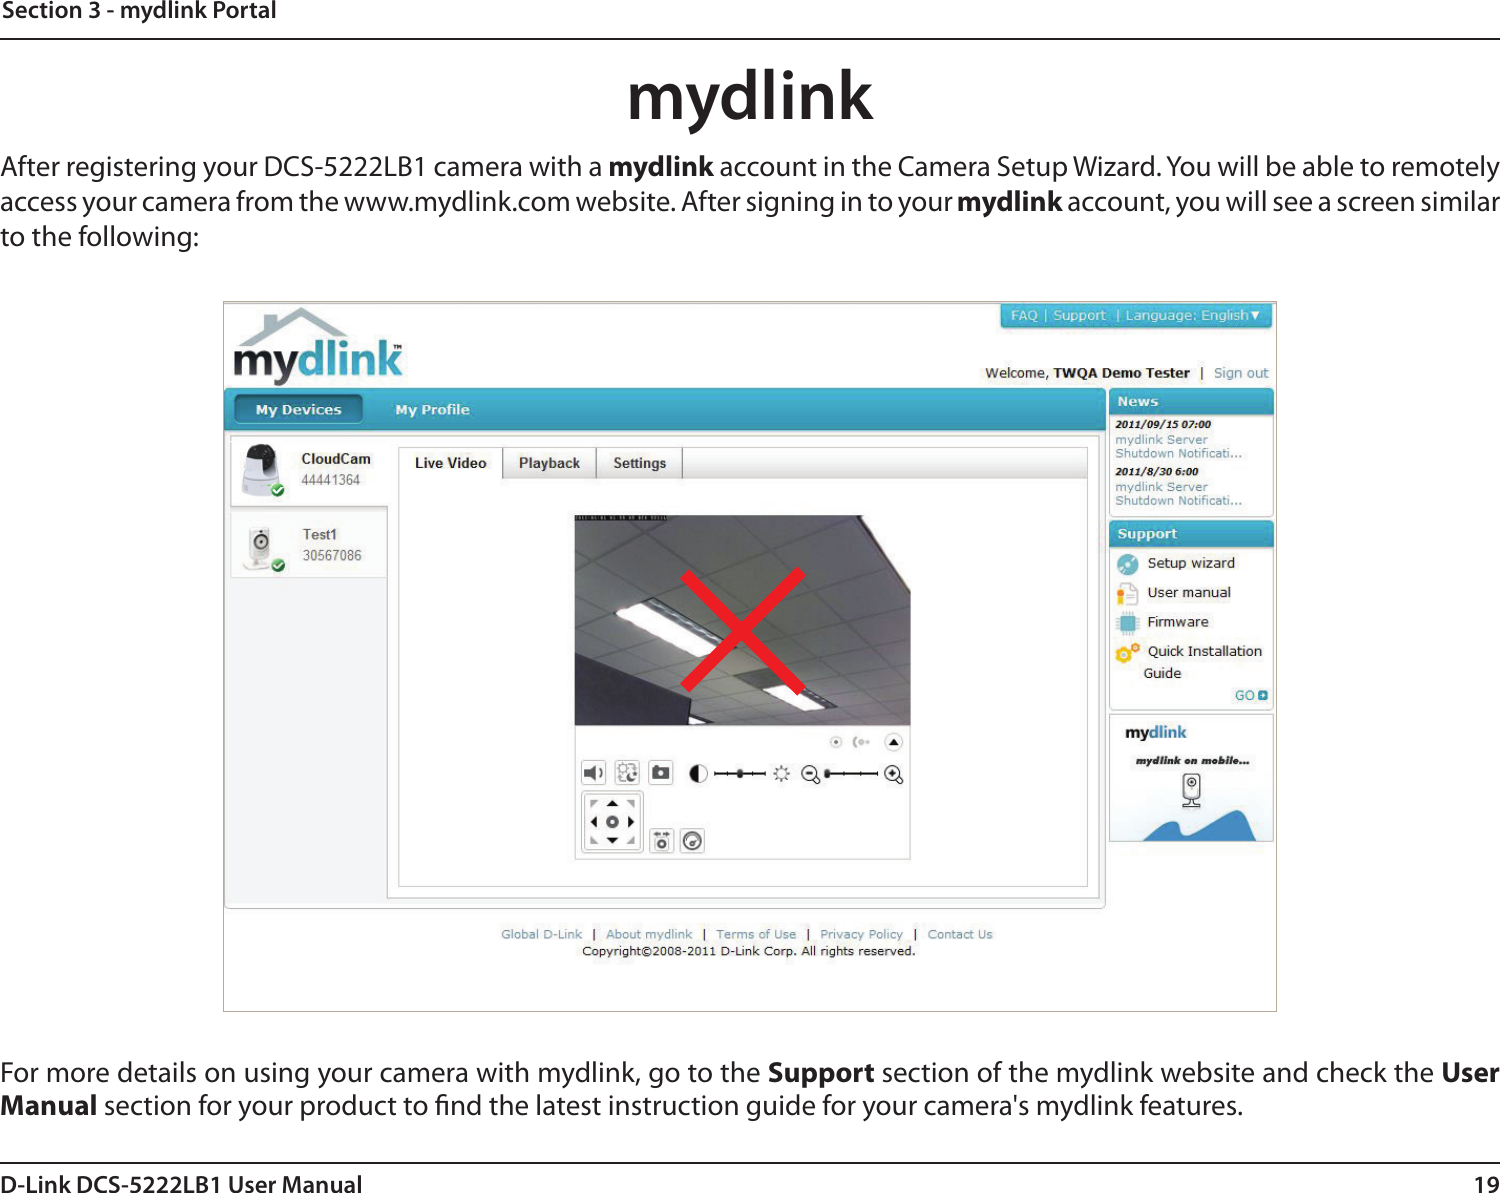 19D-Link DCS-5222LB1 User ManualSection 3 - mydlink PortalmydlinkAfter registering your DCS-5222LB1 camera with a mydlink account in the Camera Setup Wizard. You will be able to remotely access your camera from the www.mydlink.com website. After signing in to your mydlink account, you will see a screen similar to the following:For more details on using your camera with mydlink, go to the Support section of the mydlink website and check the User Manual section for your product to nd the latest instruction guide for your camera&apos;s mydlink features.